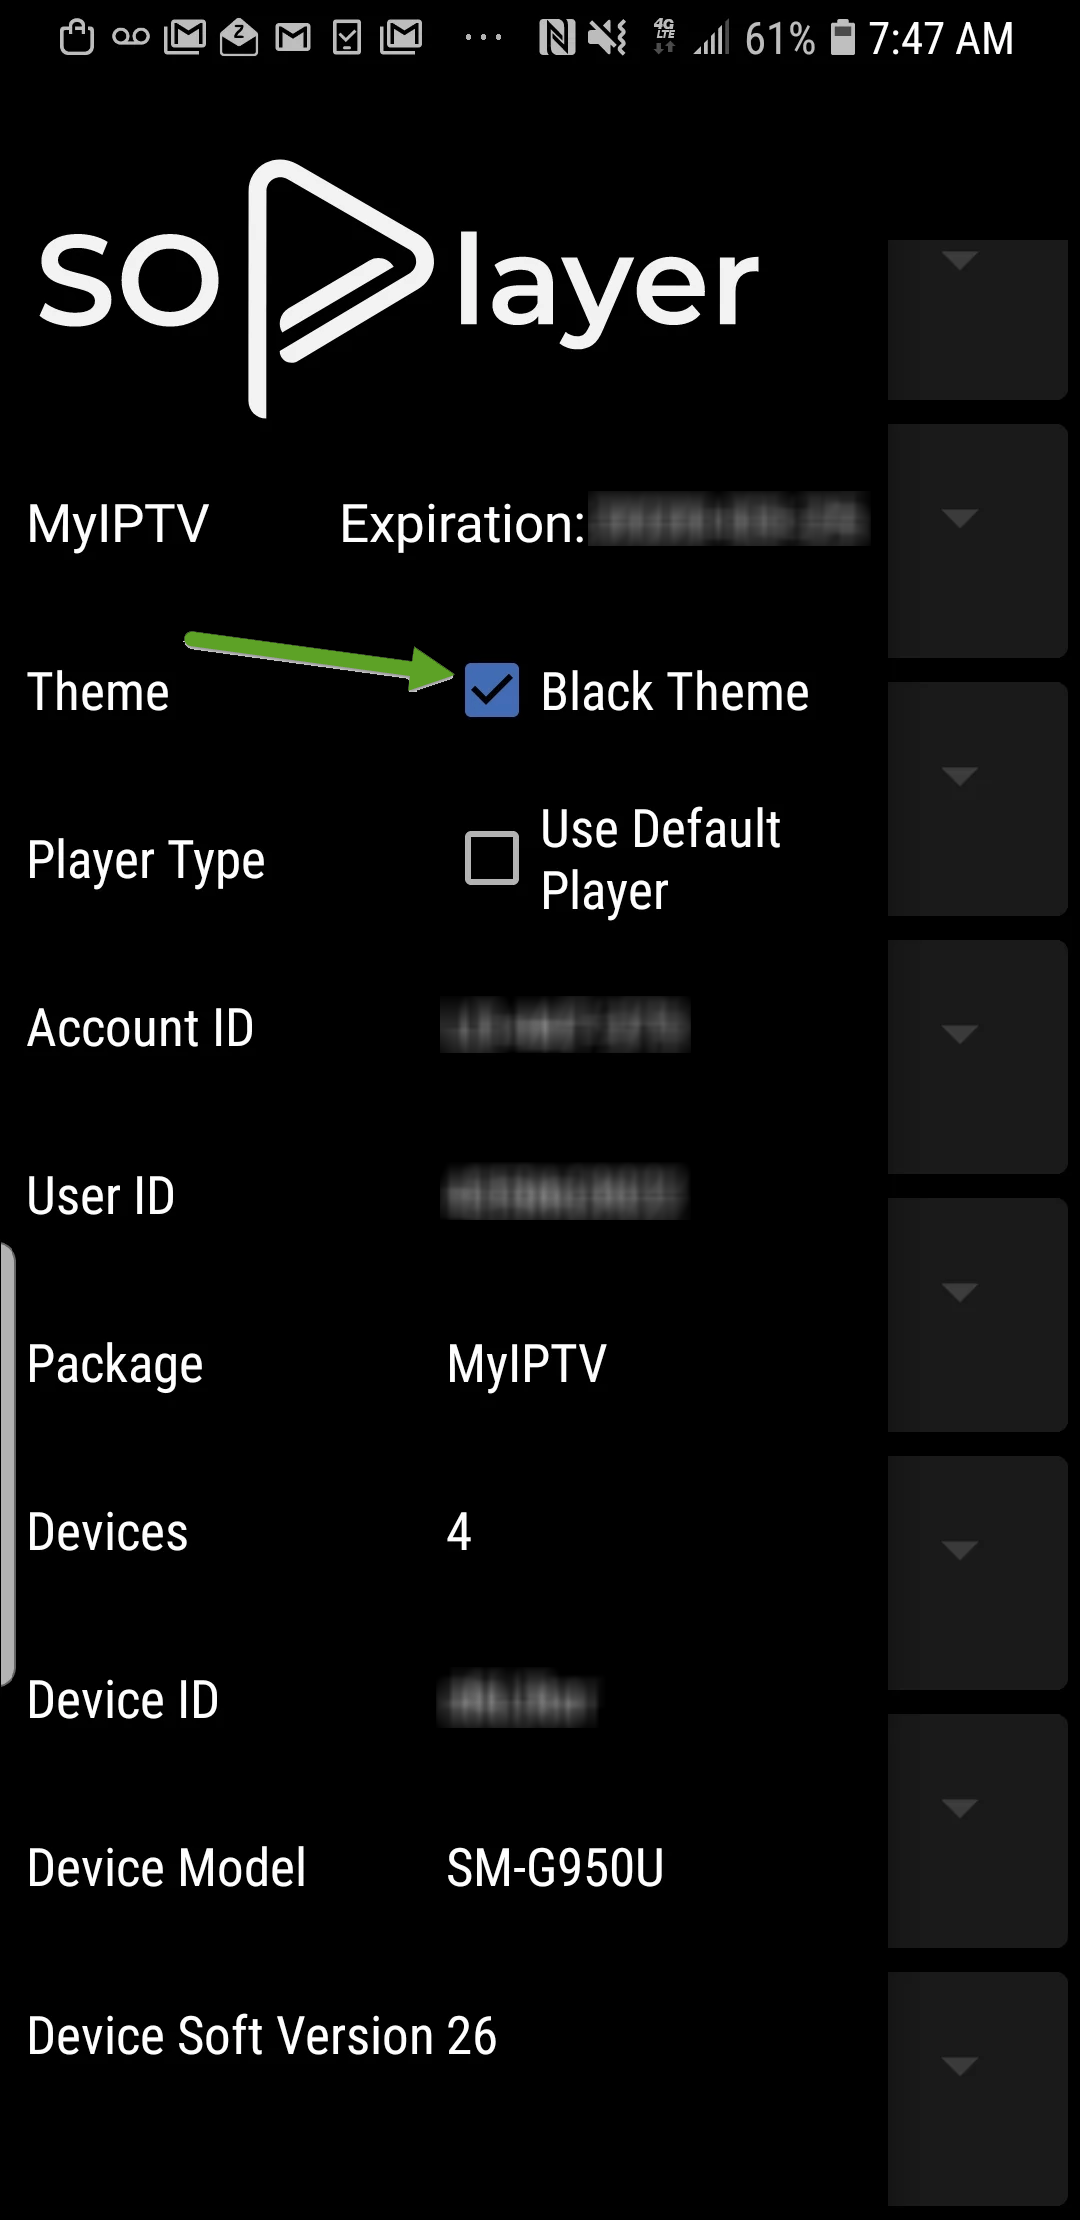 soplayer settings page